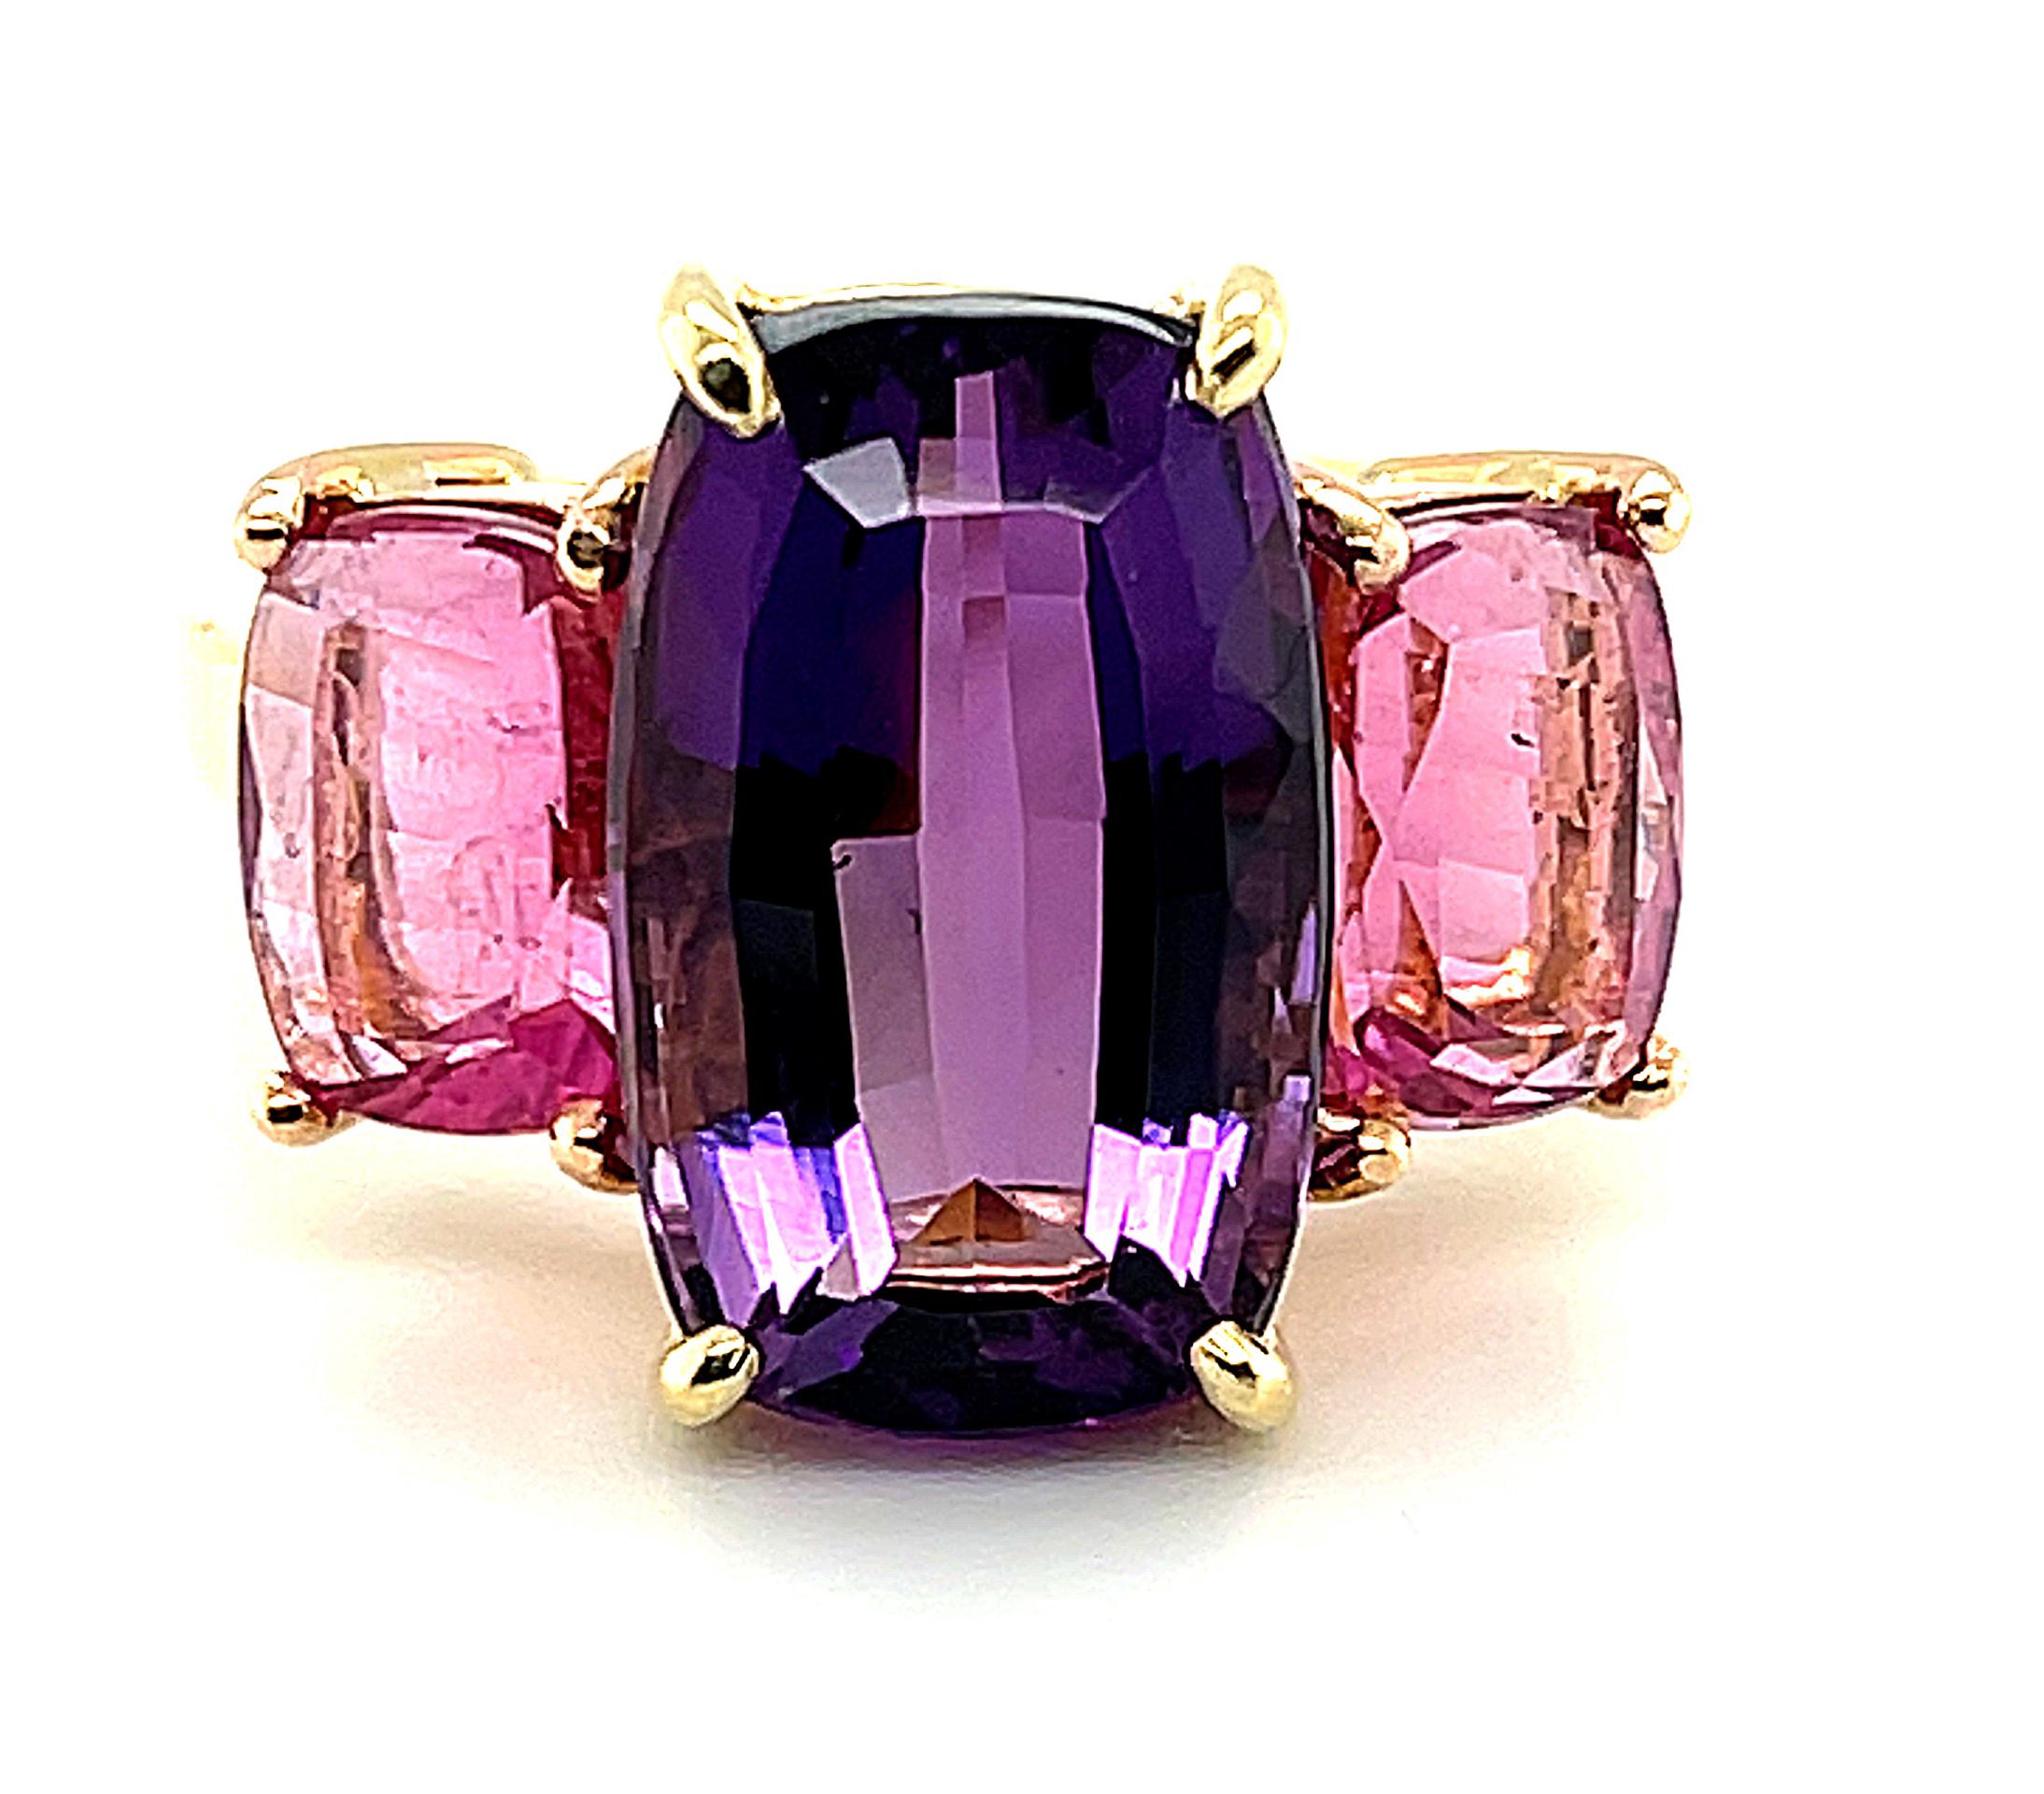 Passionate purple amethyst is paired with vibrant, fuschia- colored pink tourmalines in this stunningly colorful ring custom-designed by our Master Jewelers. The 6.32 carat amethyst is set in 18k yellow gold, while the pink tourmalines have been set